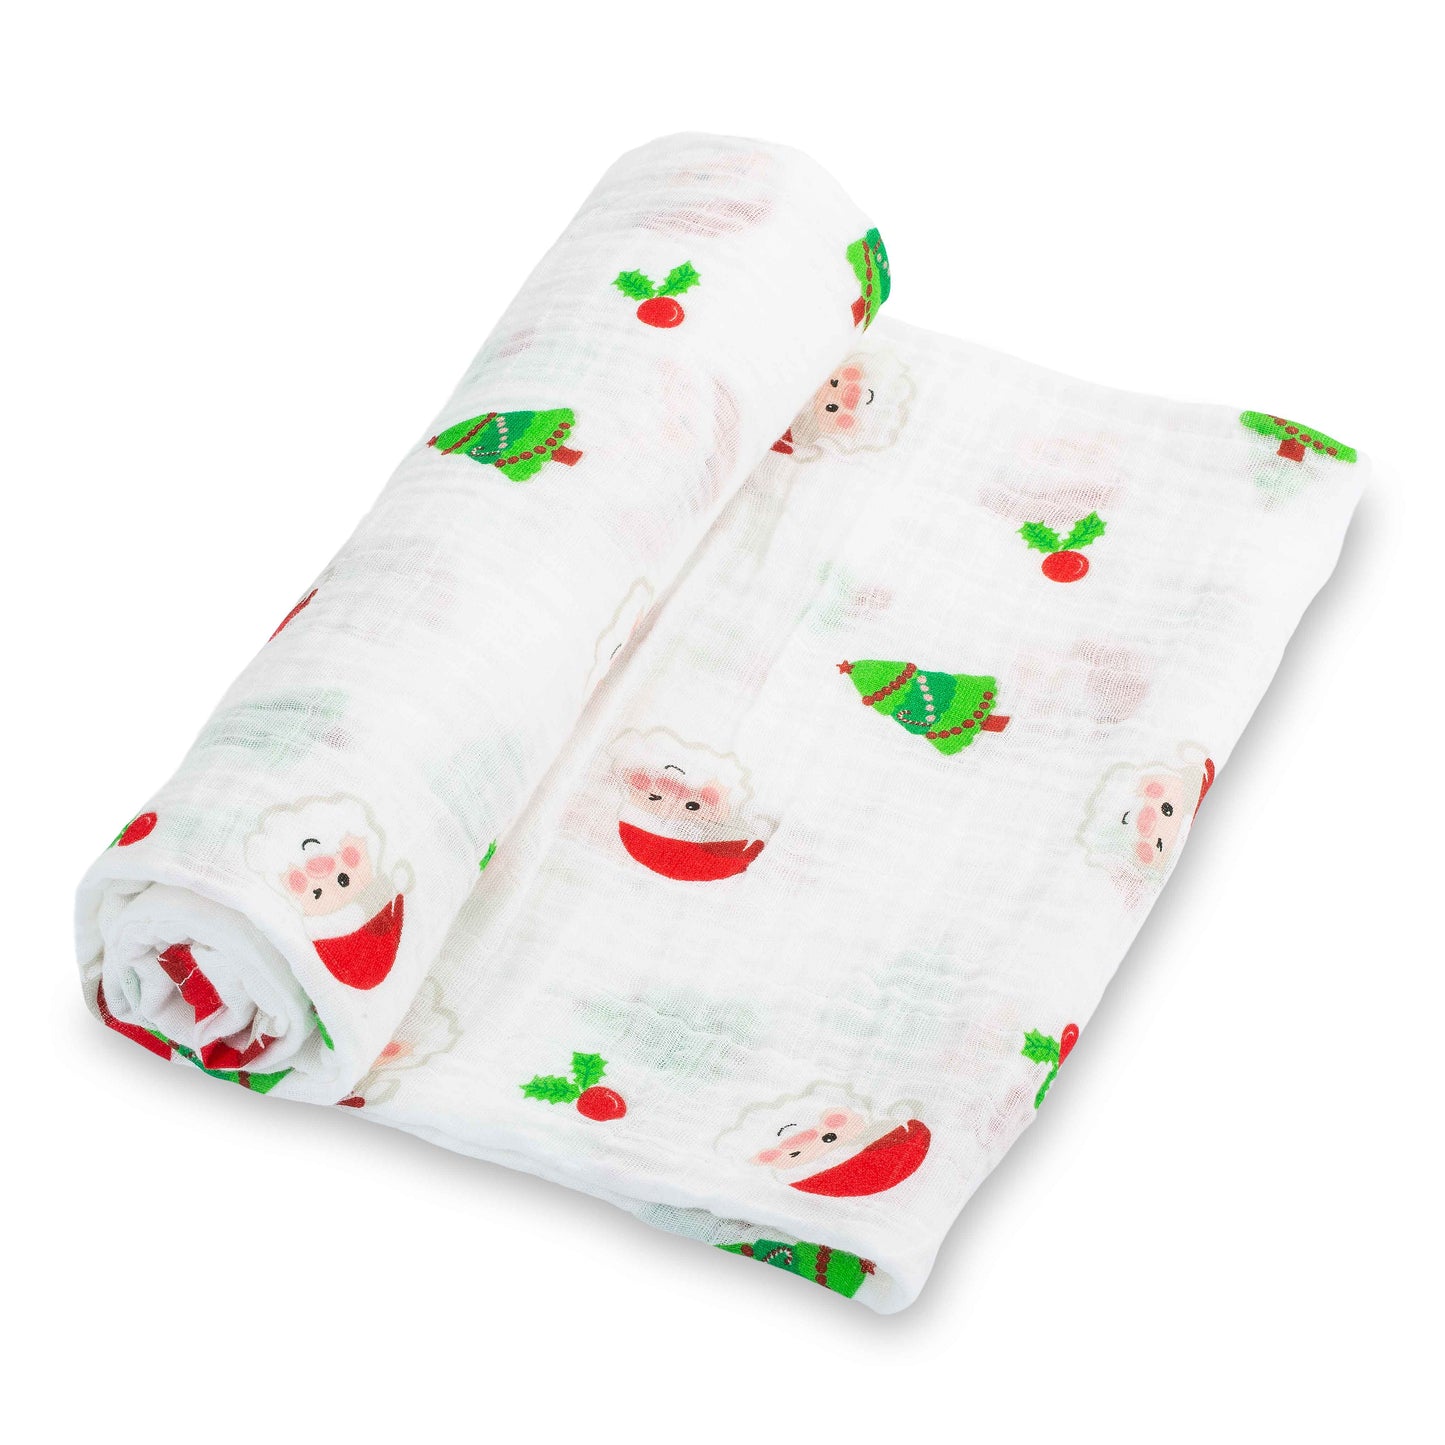 Santa Claus is Coming to Town Swaddle by LollyBanks - Christmas gift